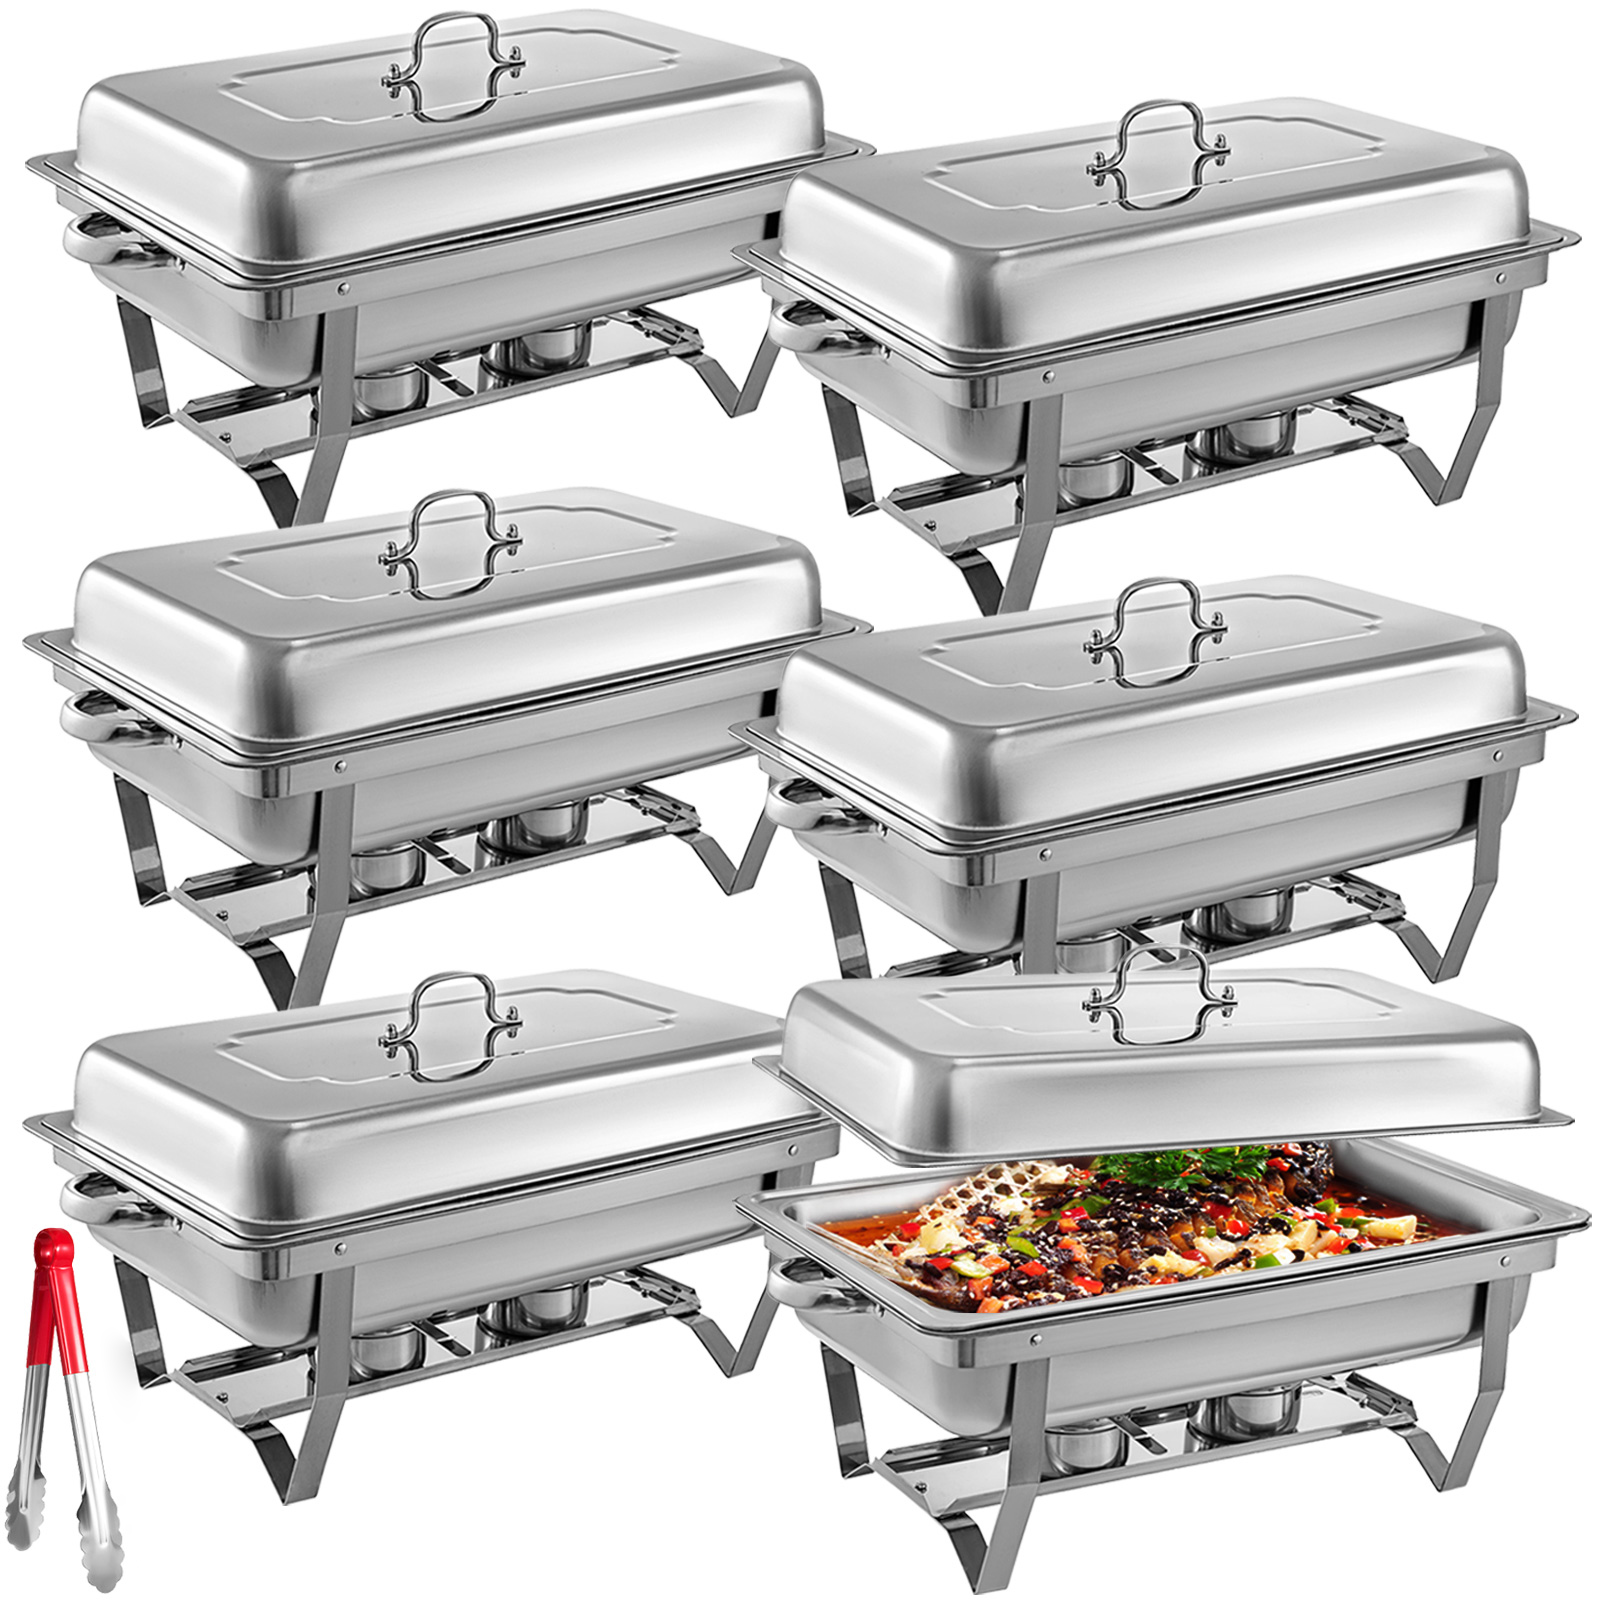 6Pack Chafer Catering Chafing Dish 8 QT Buffet Server Rectangular Food Pan 